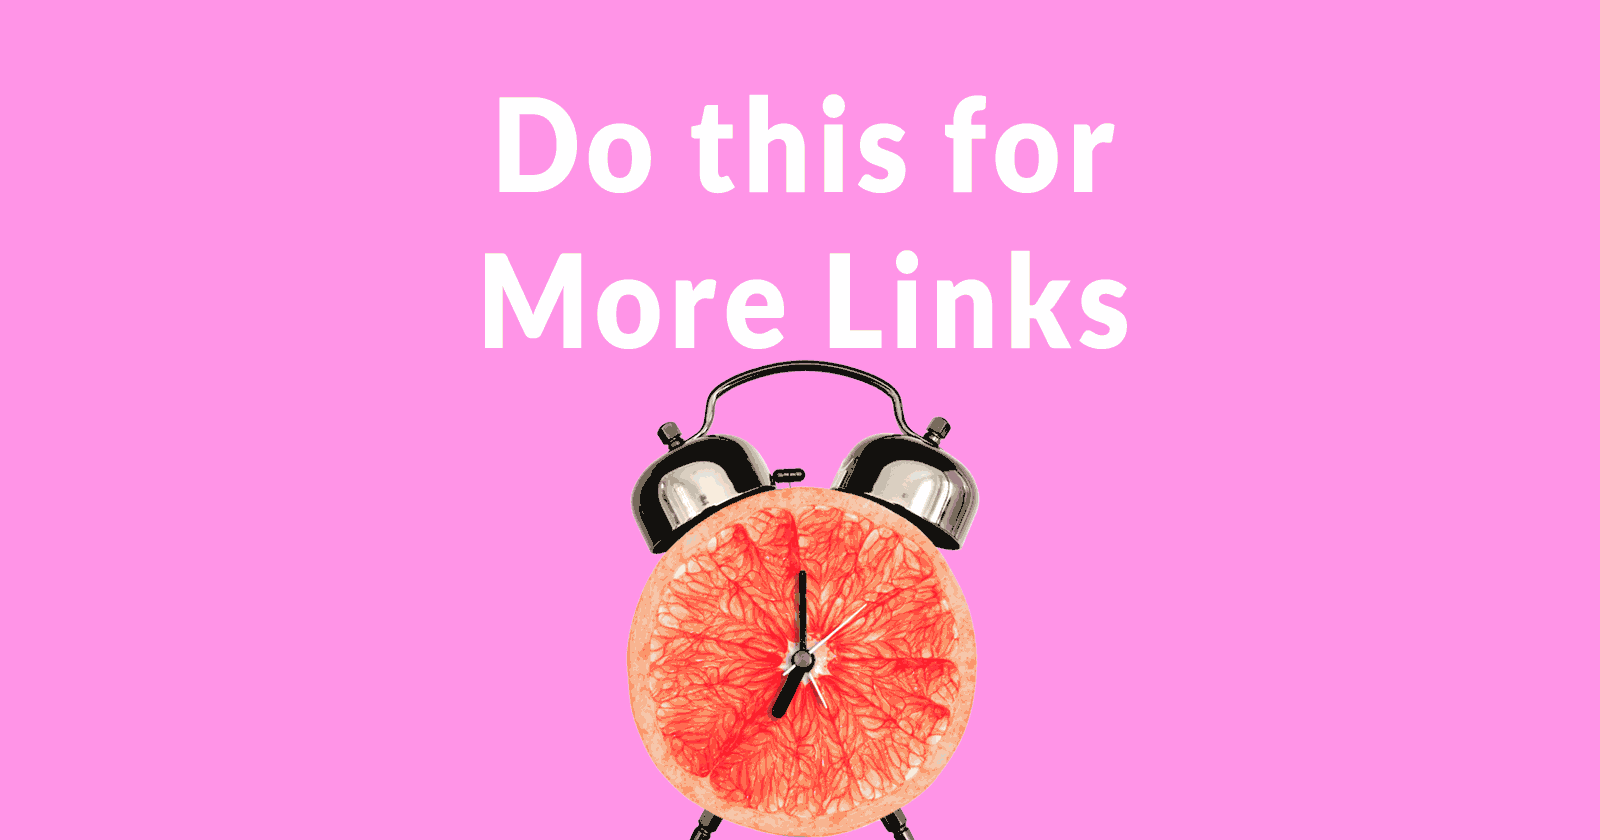 Do this for more links